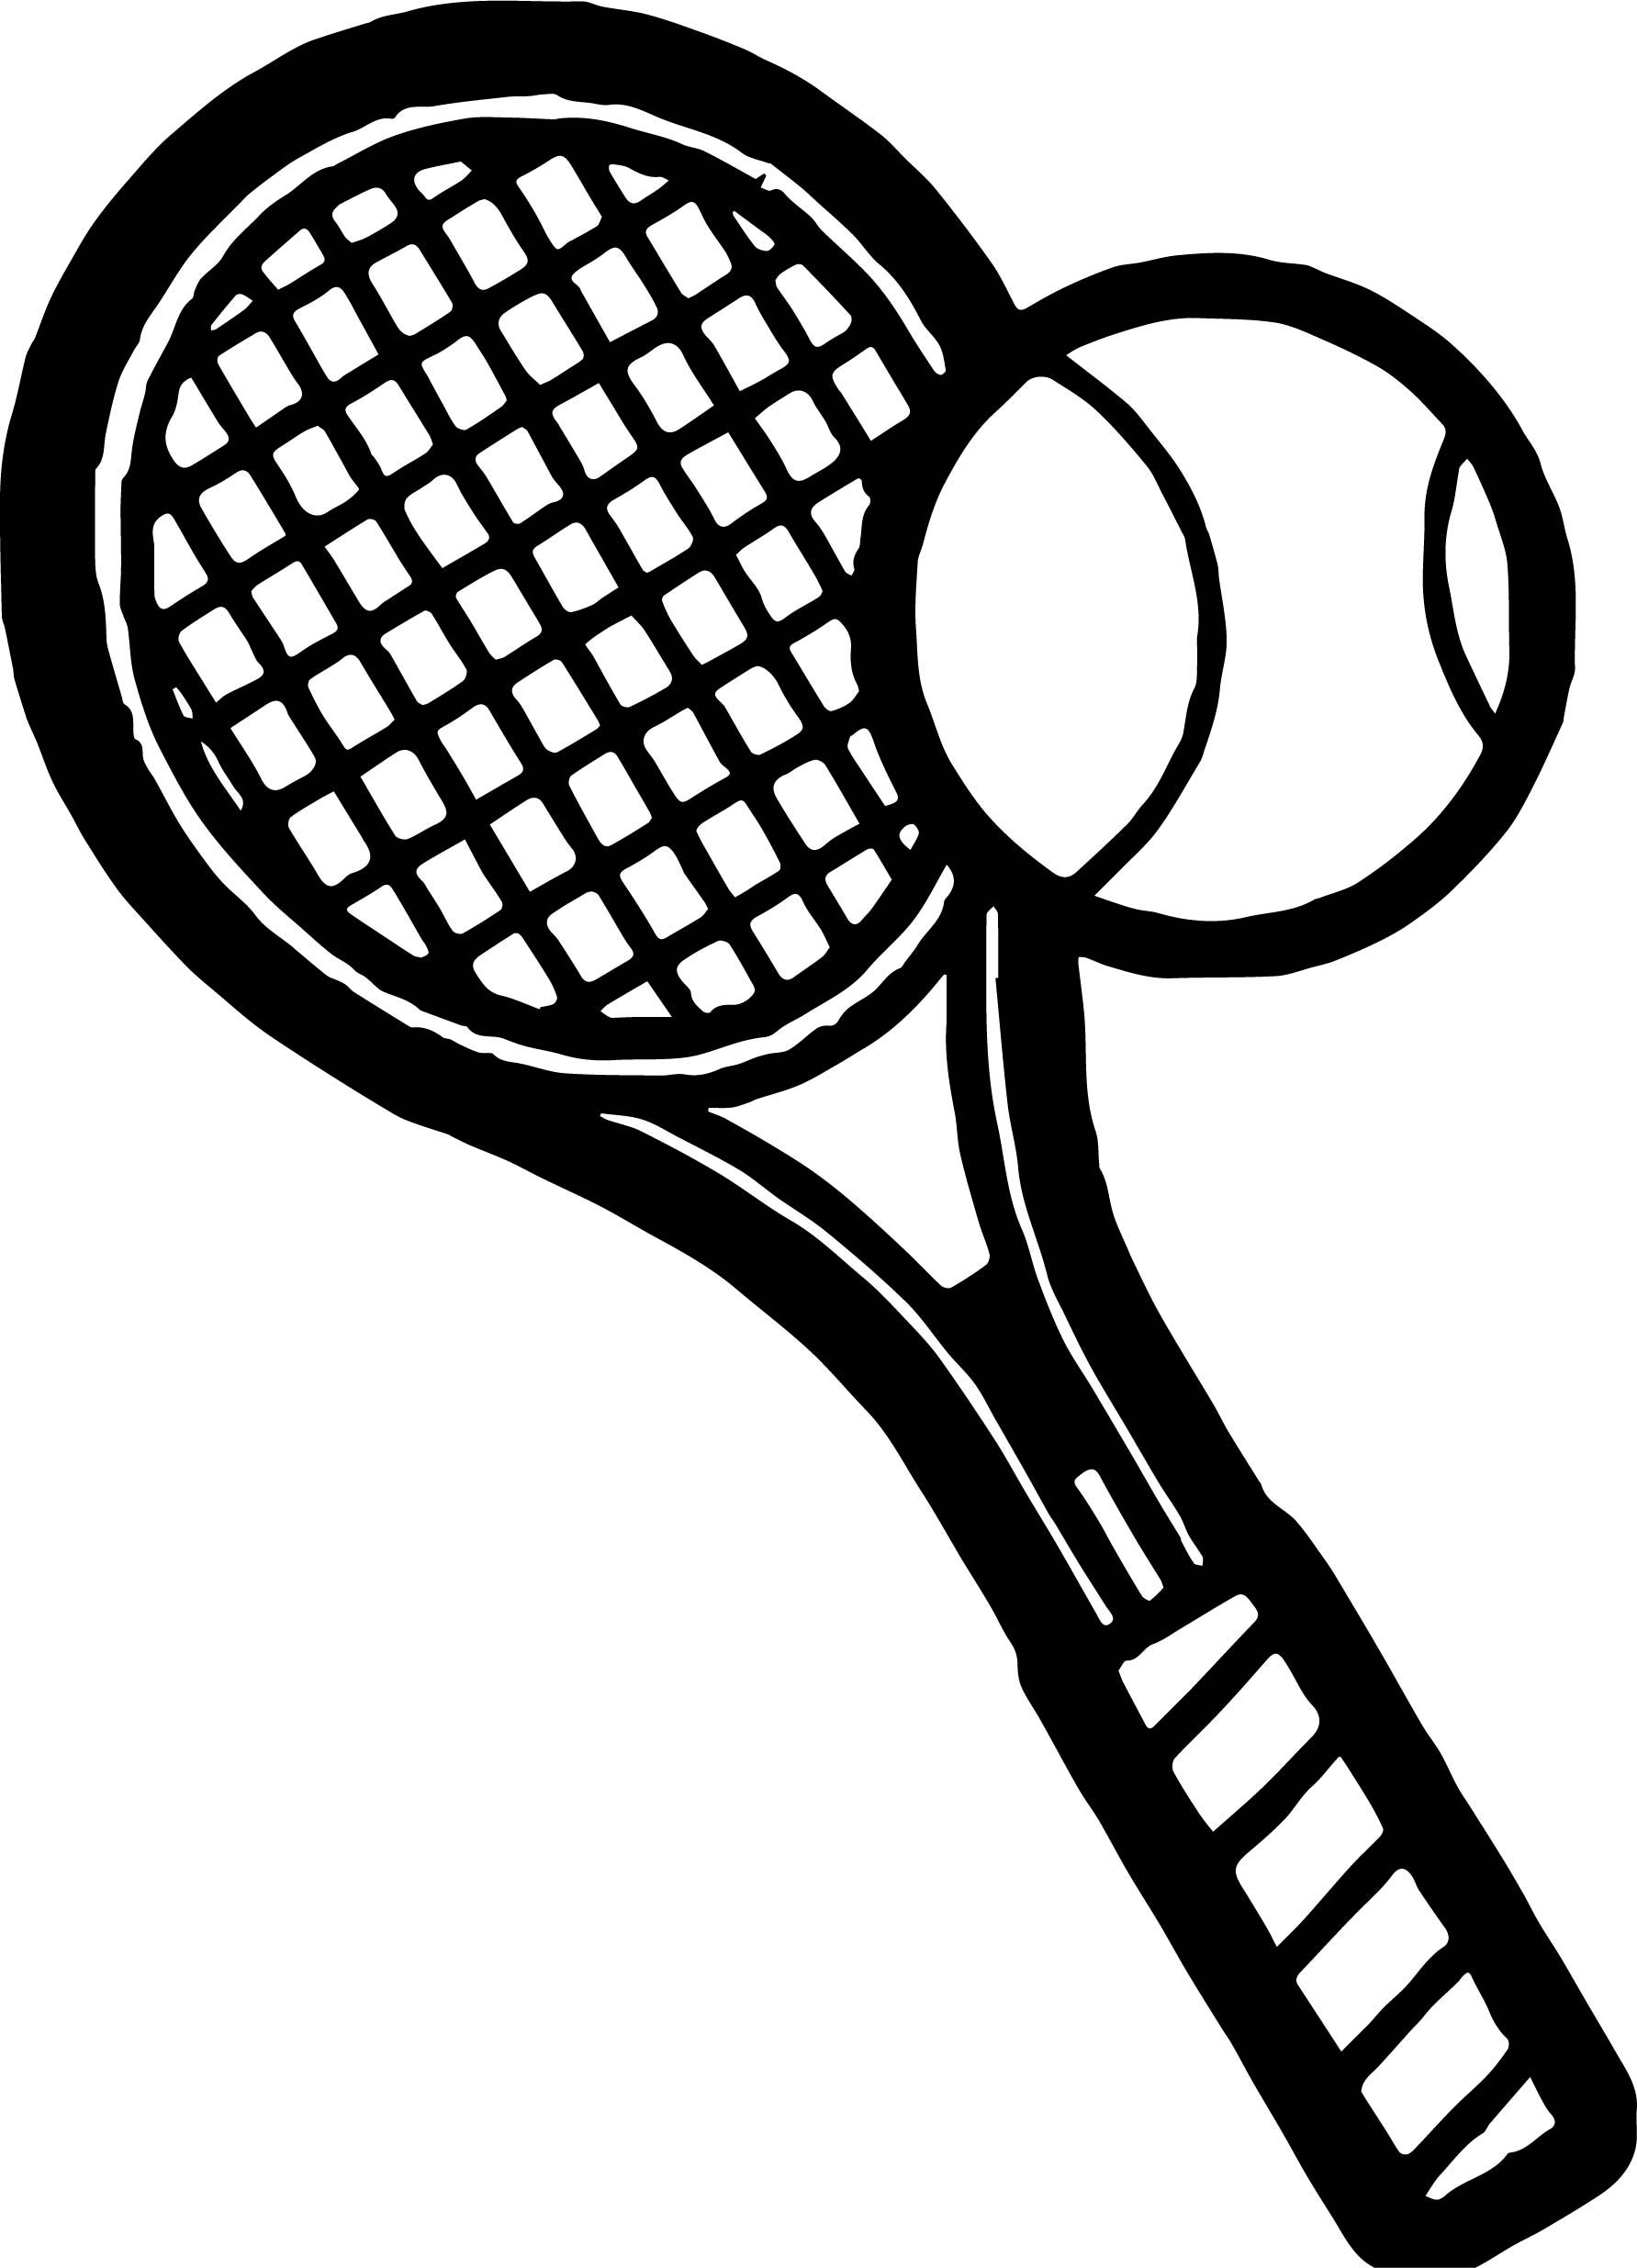 awesome Bold Tennis Racket Coloring Page | Tennis racket, Rackets, Coloring  pages